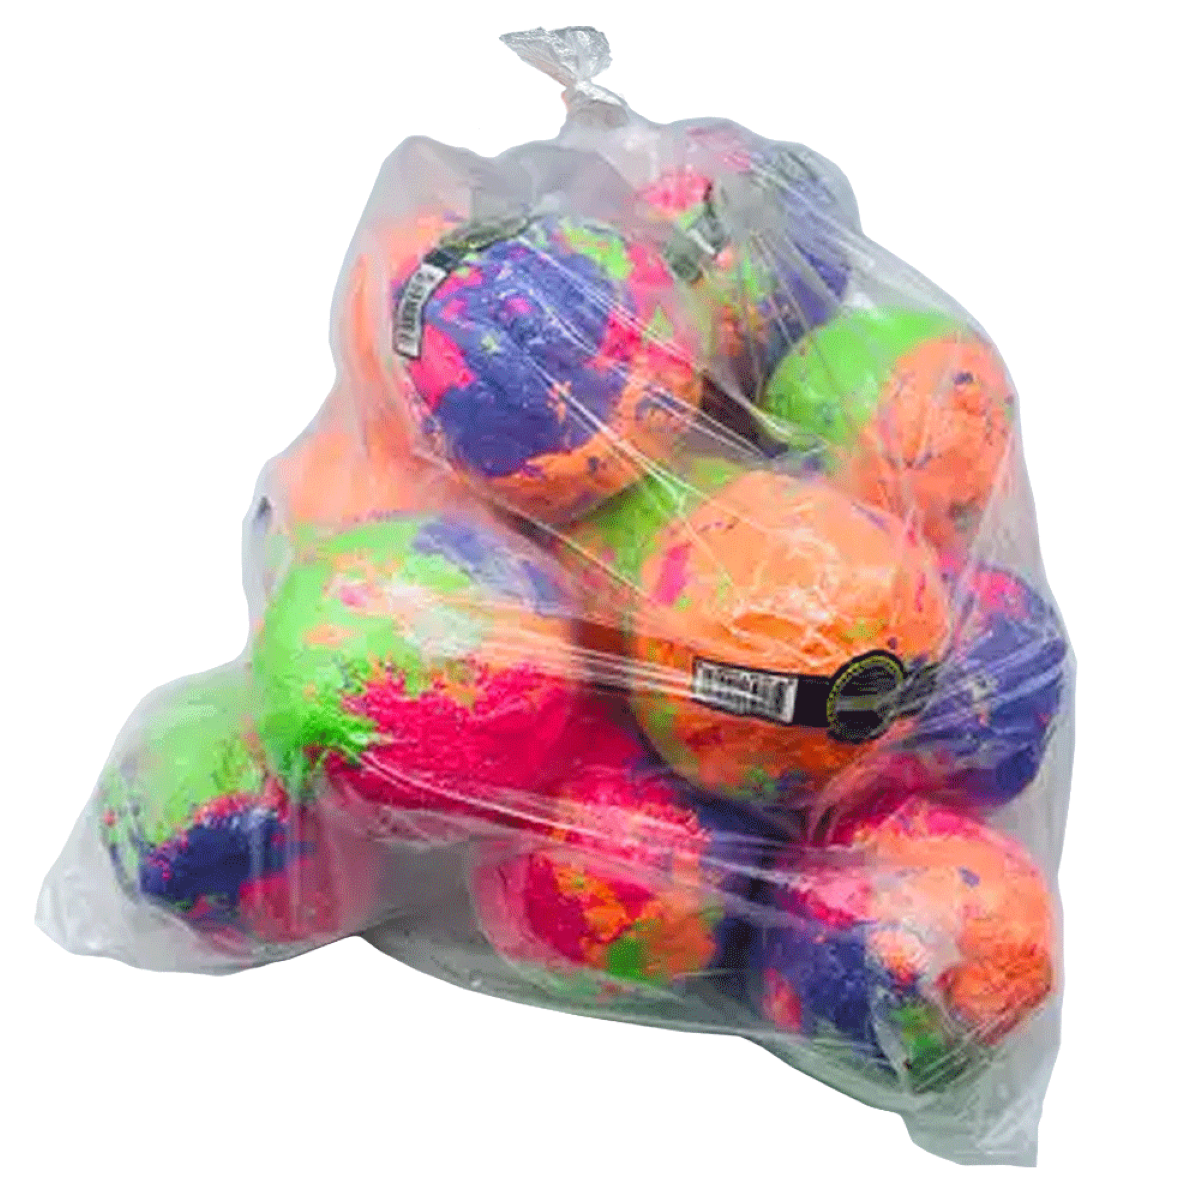 Wacky Walk'r Wunderball Indestructible Fetch Dog Toy, 12 Count - 4 Sizes Available